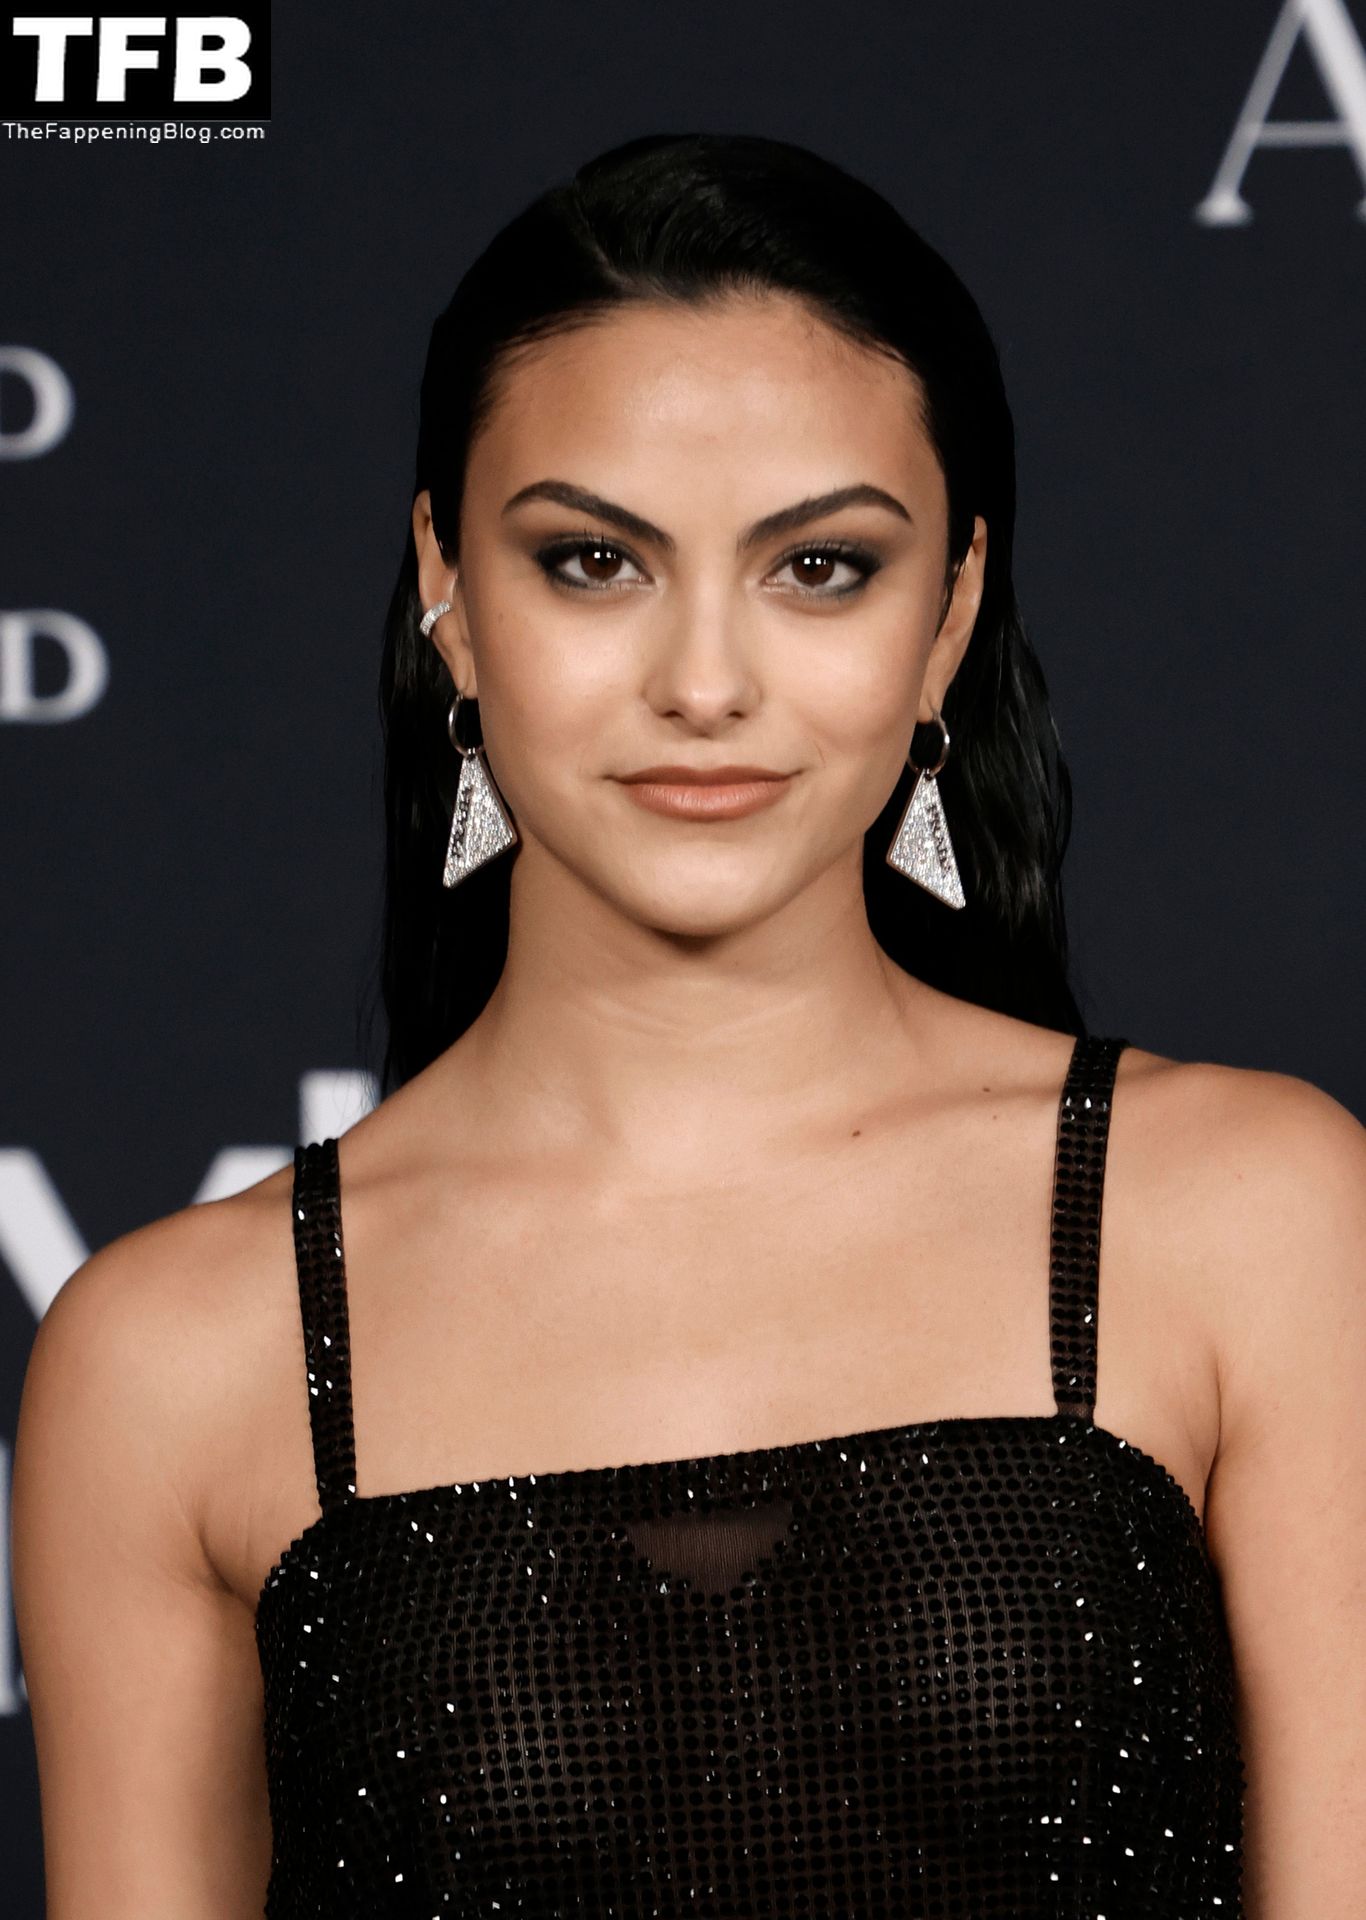 Camila-Mendes-See-Through-Tits-The-Fappening-Blog-25.jpg